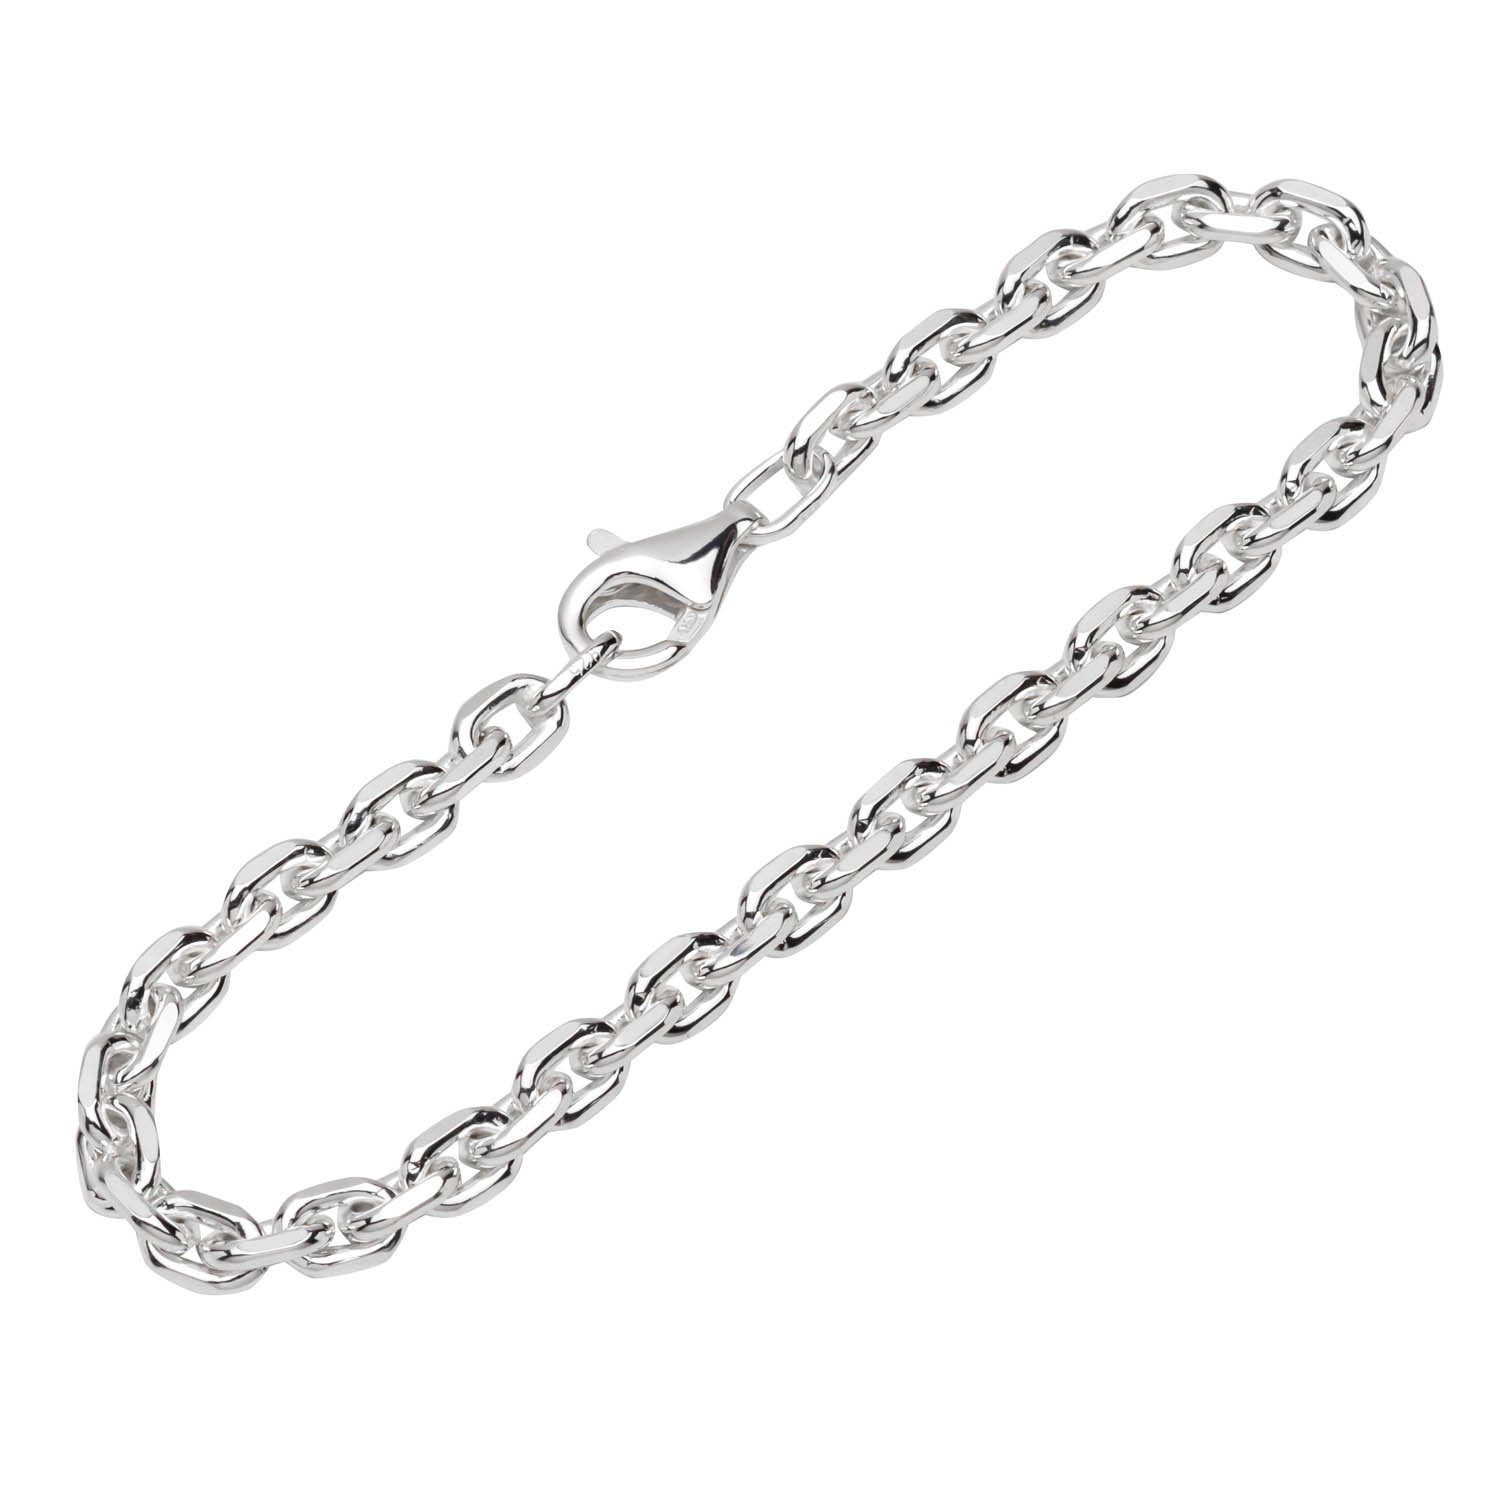 NKlaus Silberarmband Armband Sterling (1 fach Stück), Silber 19cm Ankerkette 925 4 in Made Germany